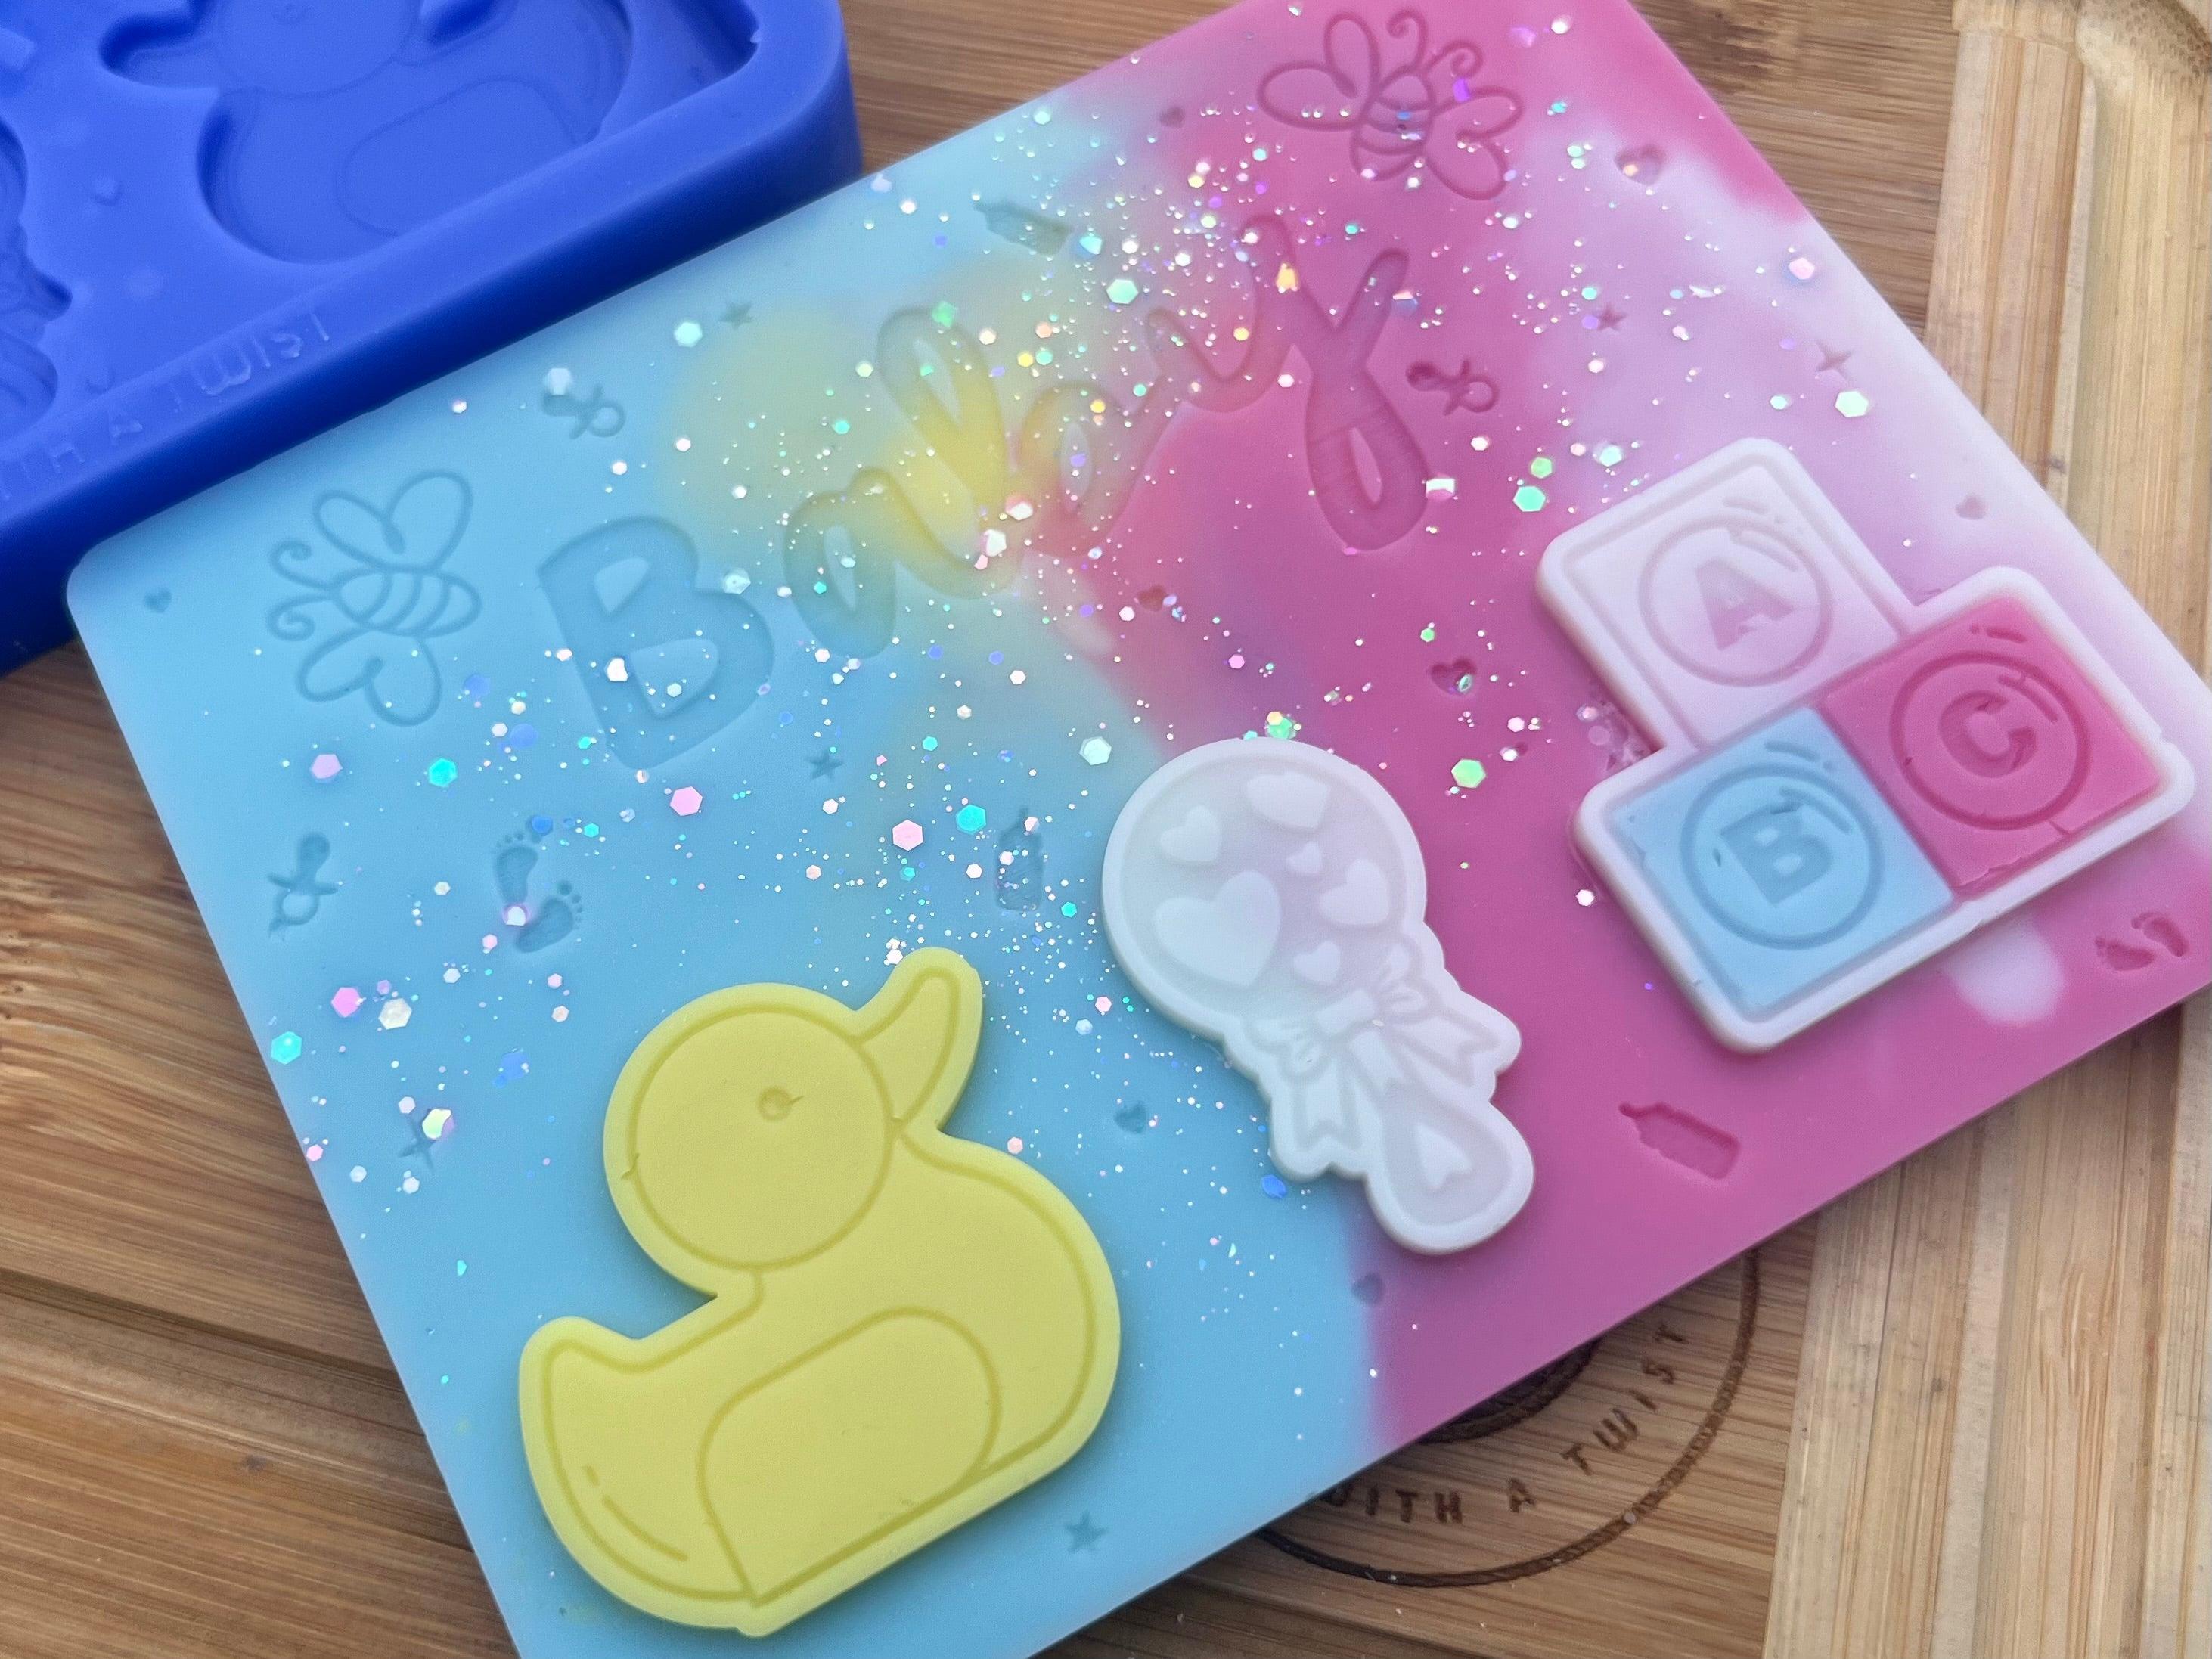 Baby Mini Slab Silicone Mold - Designed with a Twist - Top quality silicone molds made in the UK.